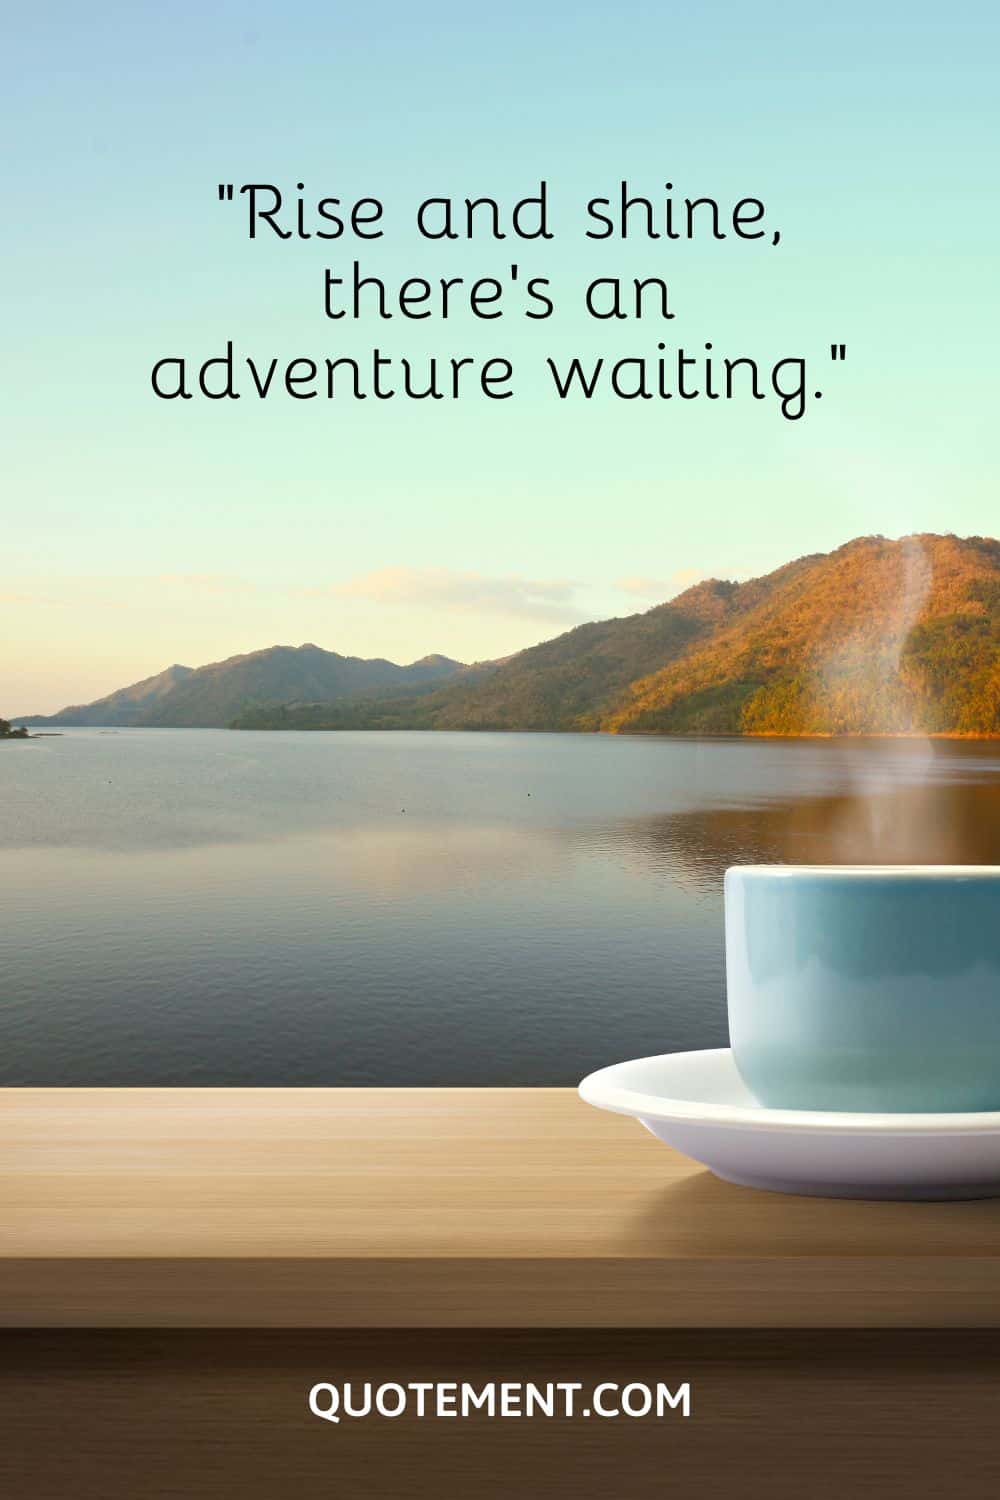 Rise and shine, there’s an adventure waiting